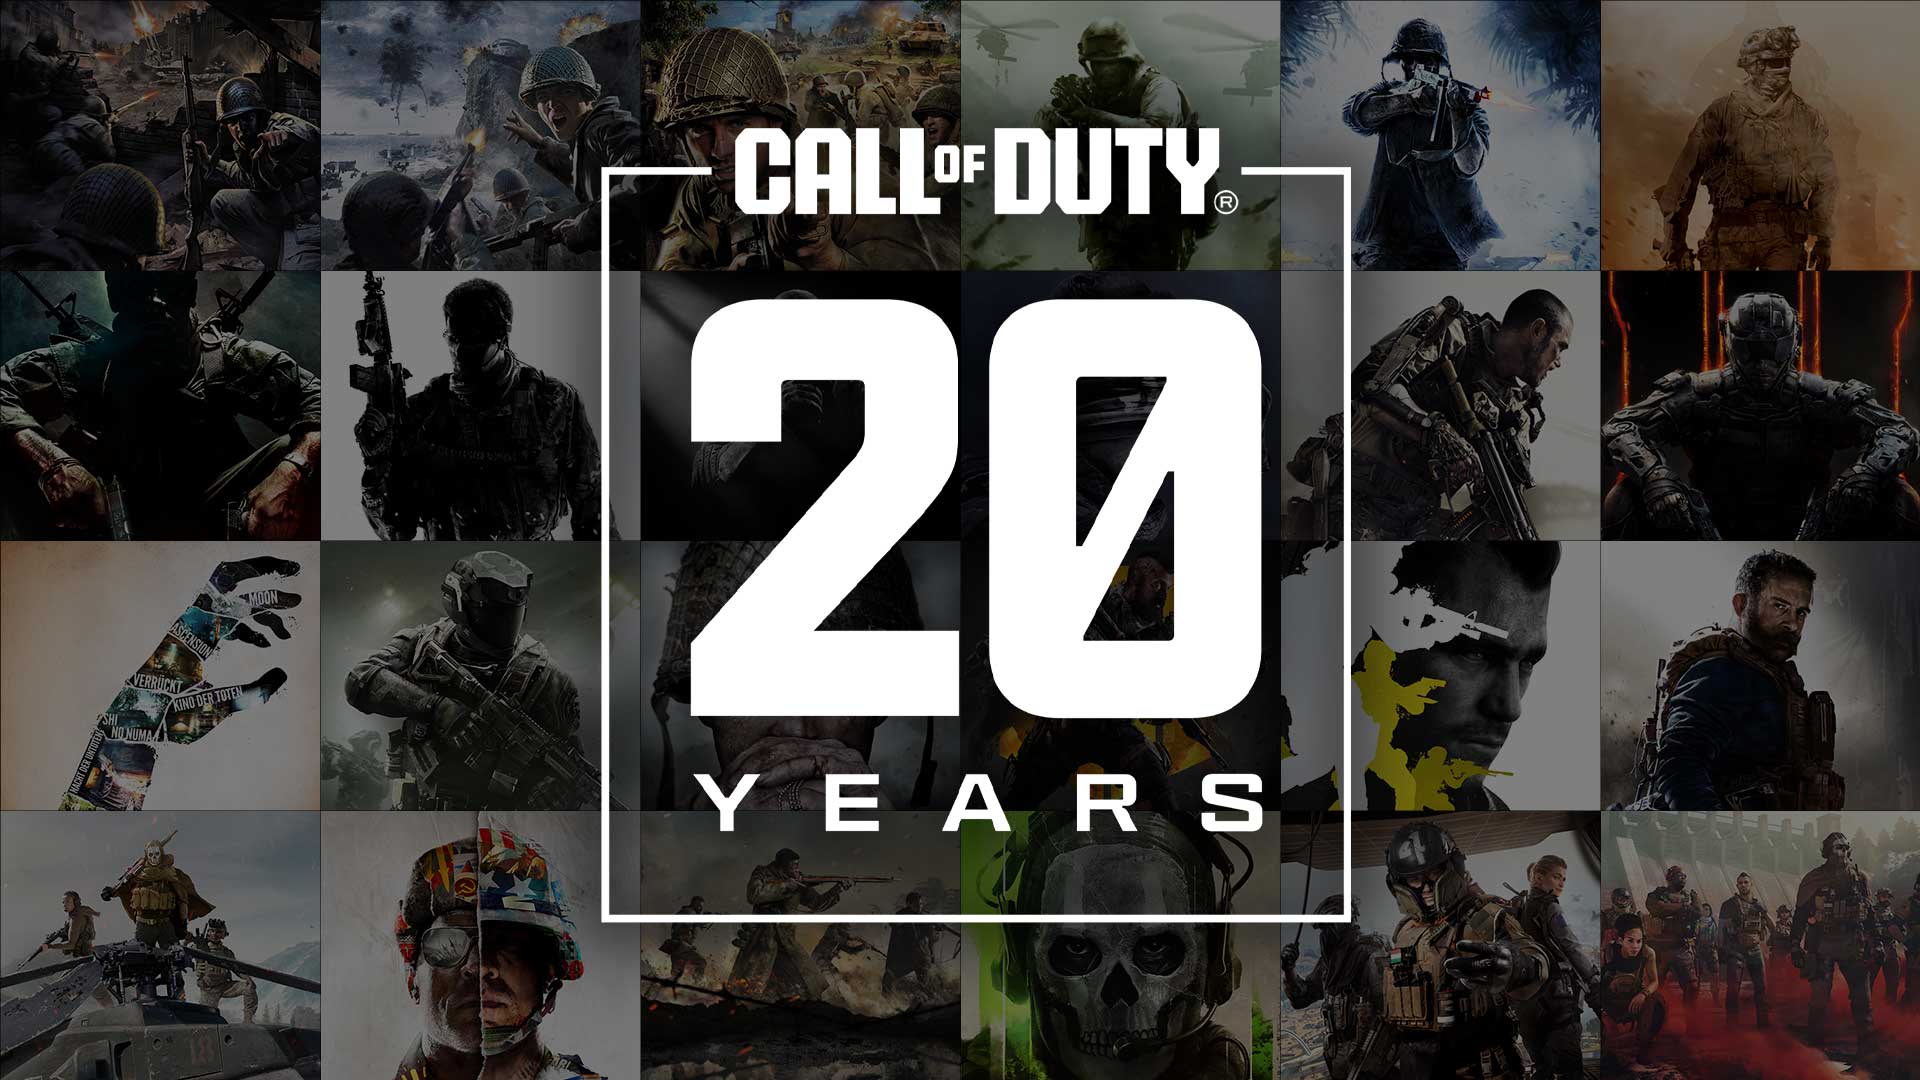 Call of Duty Celebrates its 20th Anniversary